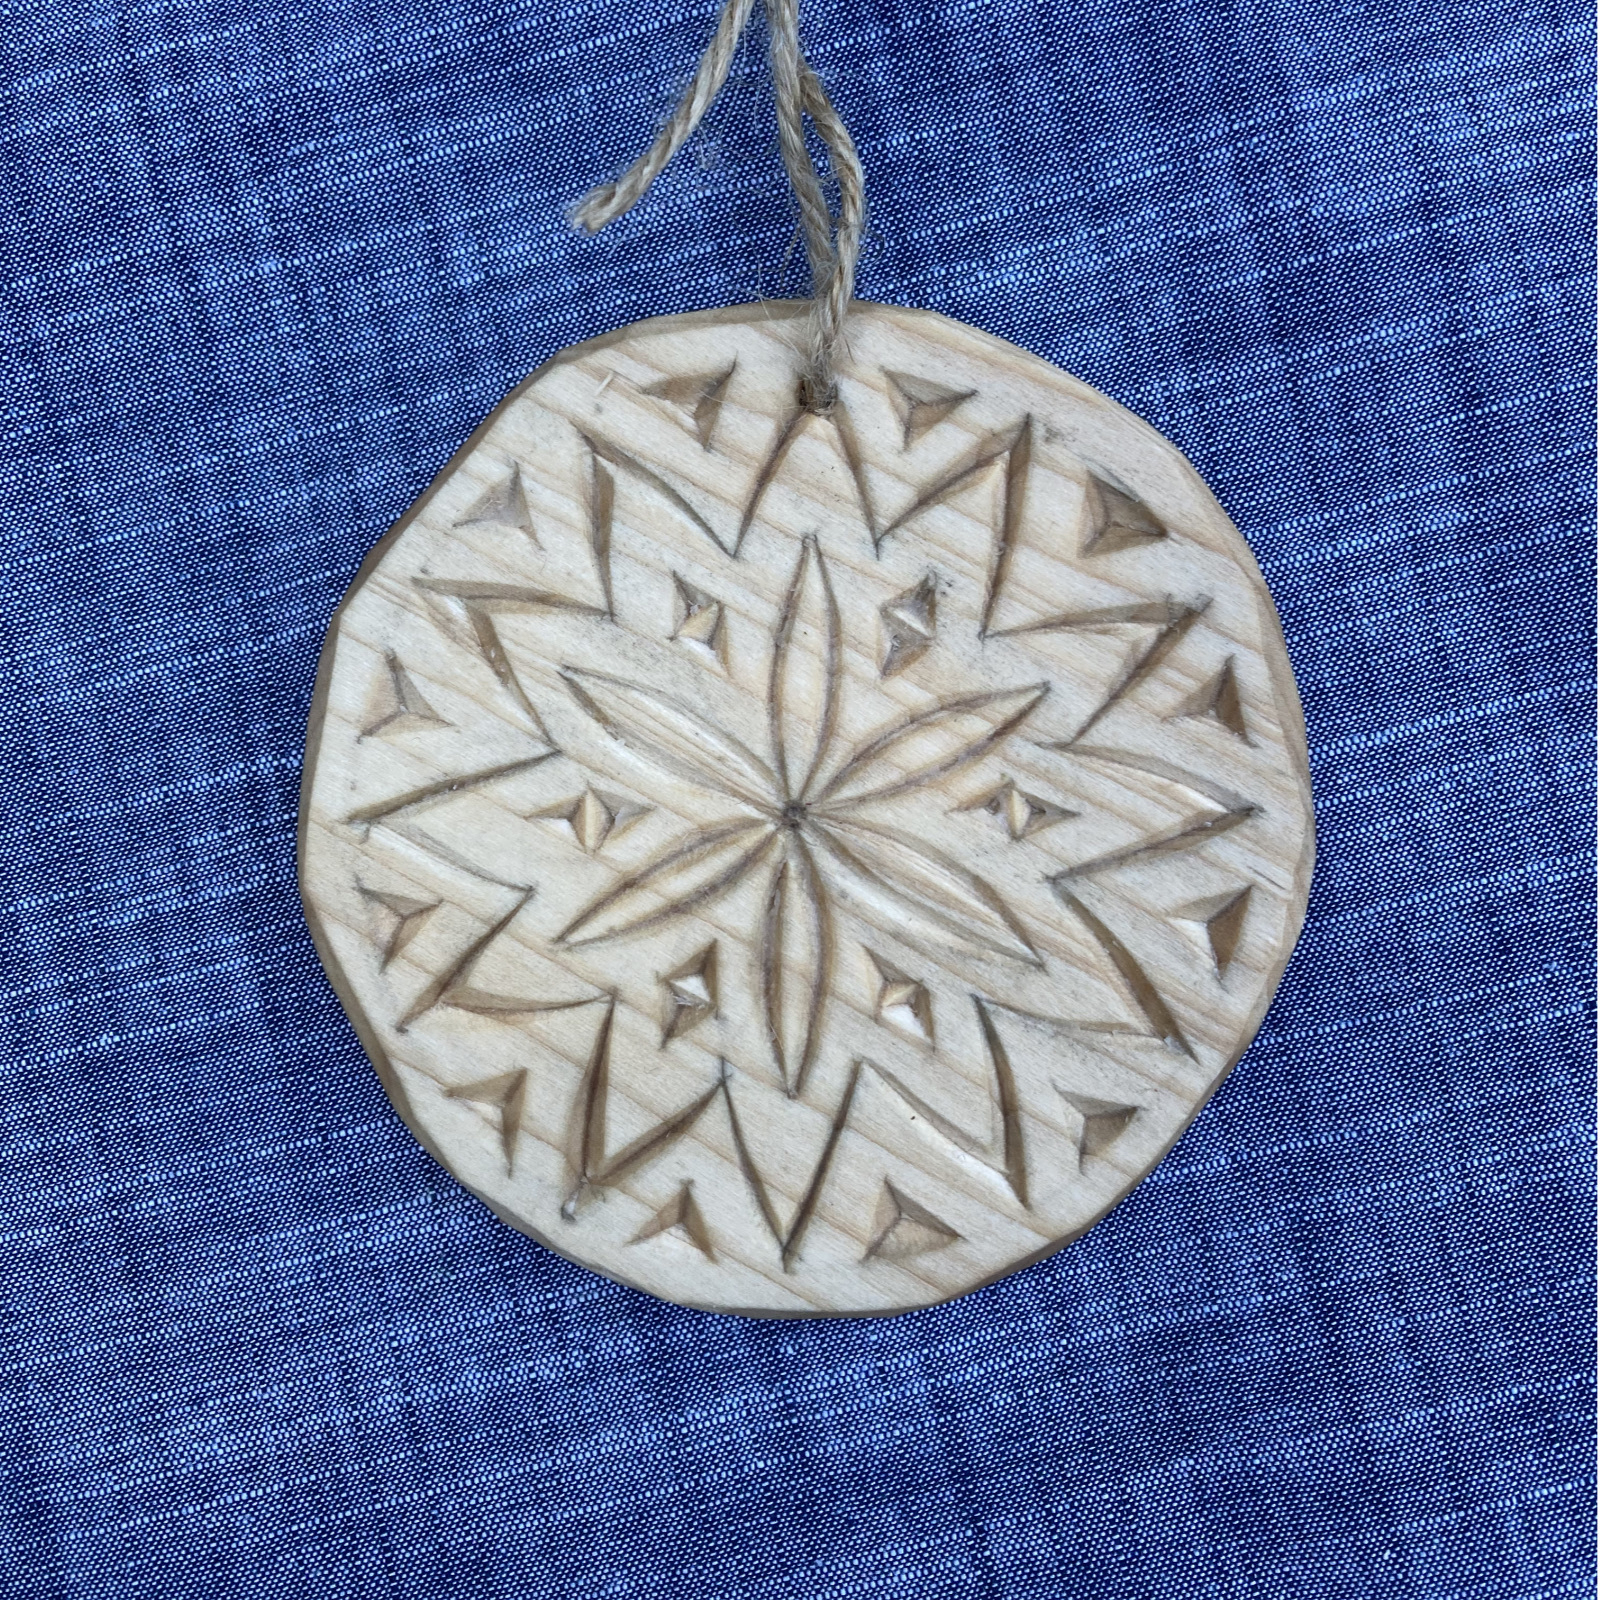 Chip-carved wooden tree ornament with six-point rosette pattern